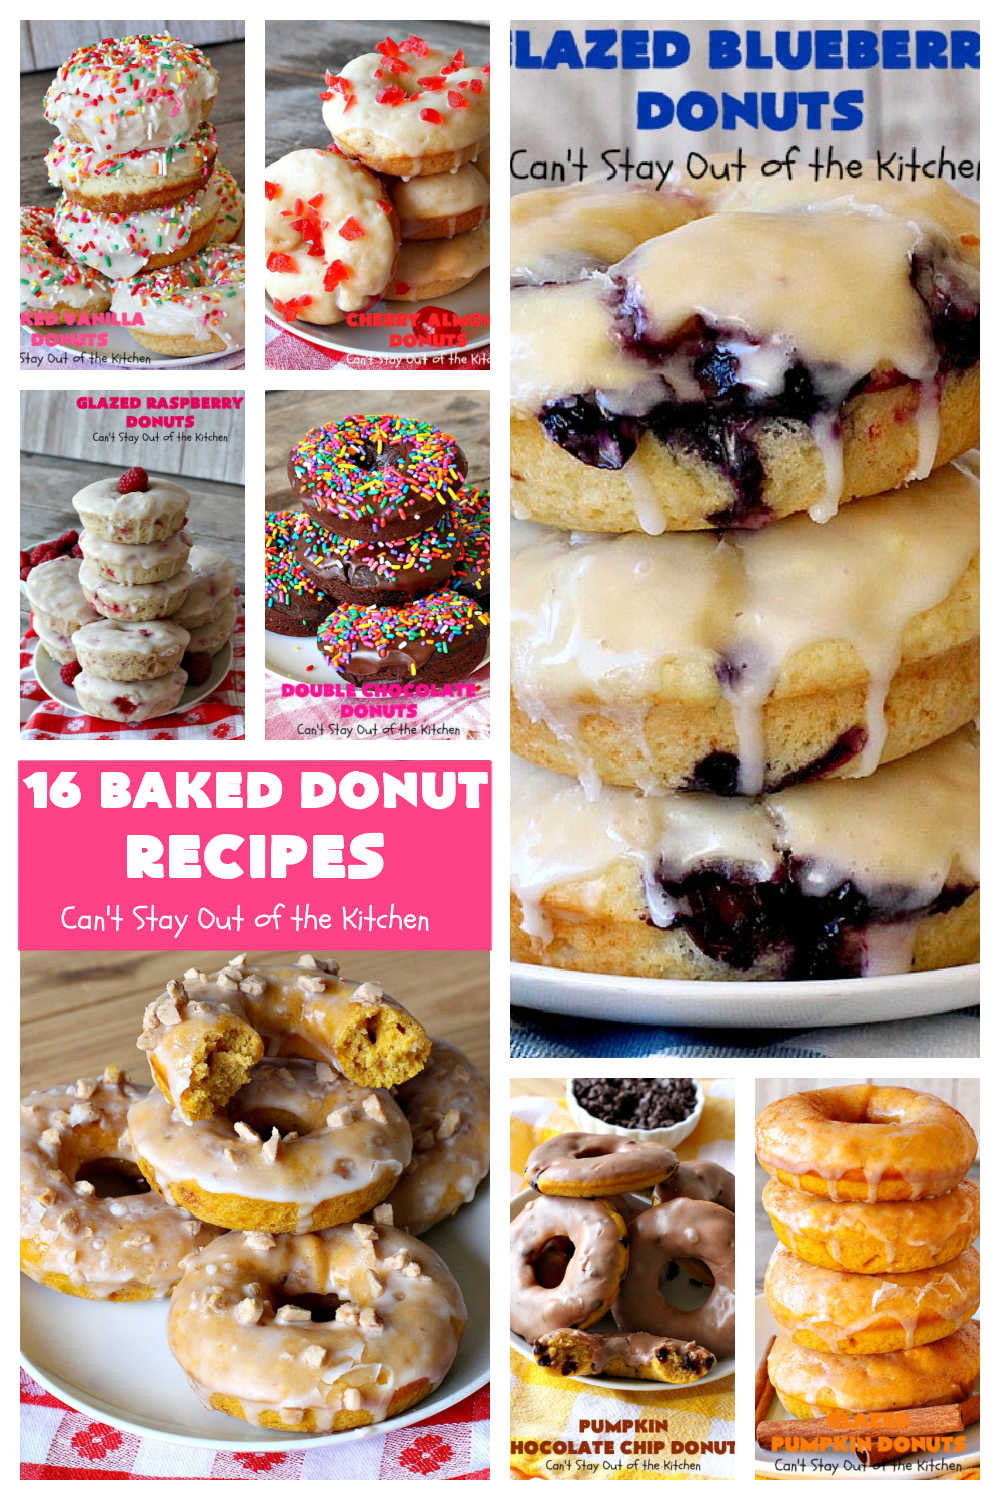 16 Baked Donut Recipes | Can't Stay Out of the Kitchen | 16 of the BEST #donut #recipes ever! Perfect for #Easter or other #holiday #breakfasts. #BakedDonuts #donuts #16BakedDonutRecipes